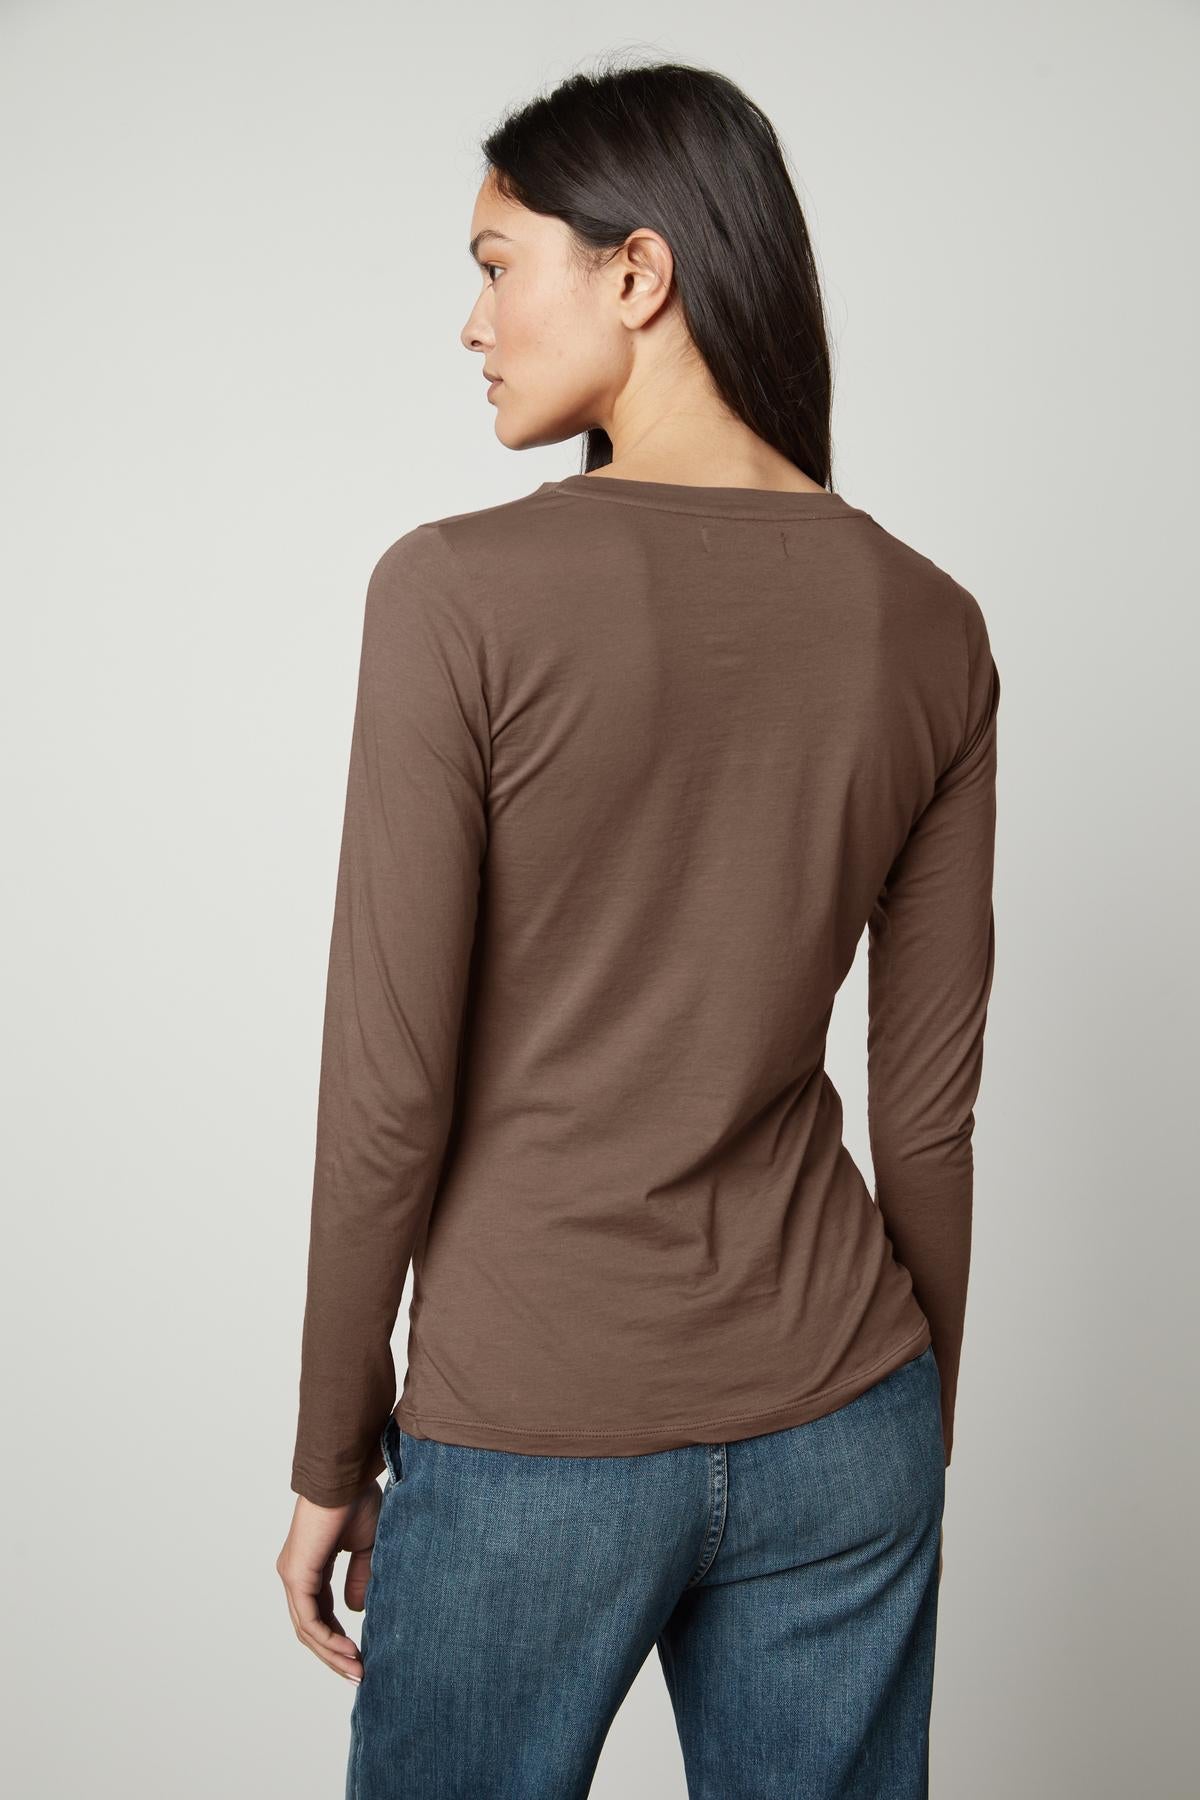 The back view of a woman wearing a Velvet by Graham & Spencer ZOFINA GAUZY WHISPER FITTED CREW NECK TEE.-35783262404801